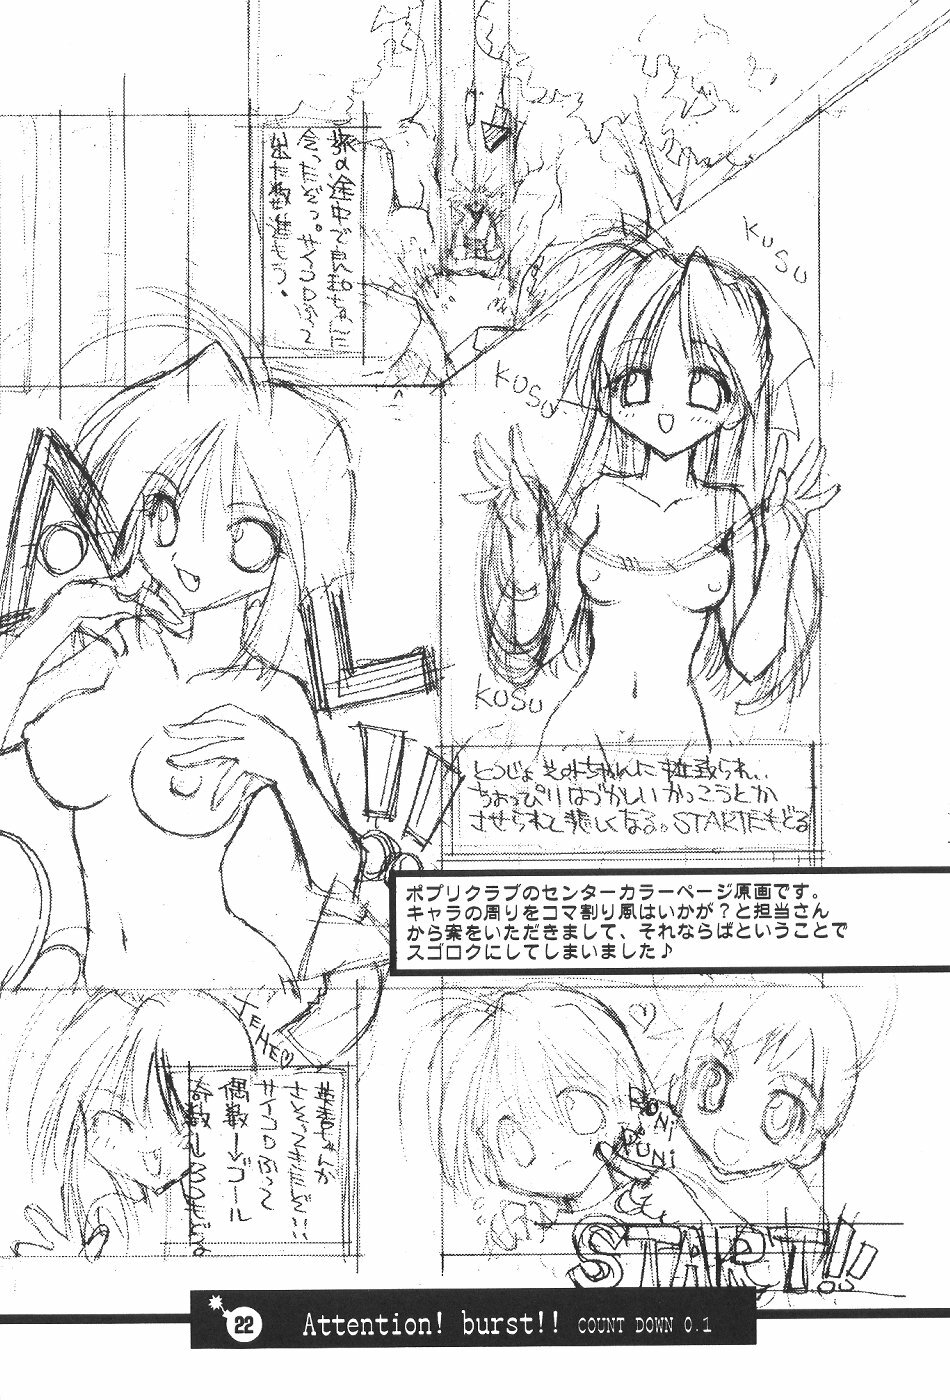 (C61) [Your's Wow (Konata Hyuura)] Bakusun Attention! Burst!! Count Down 0.1 page 23 full